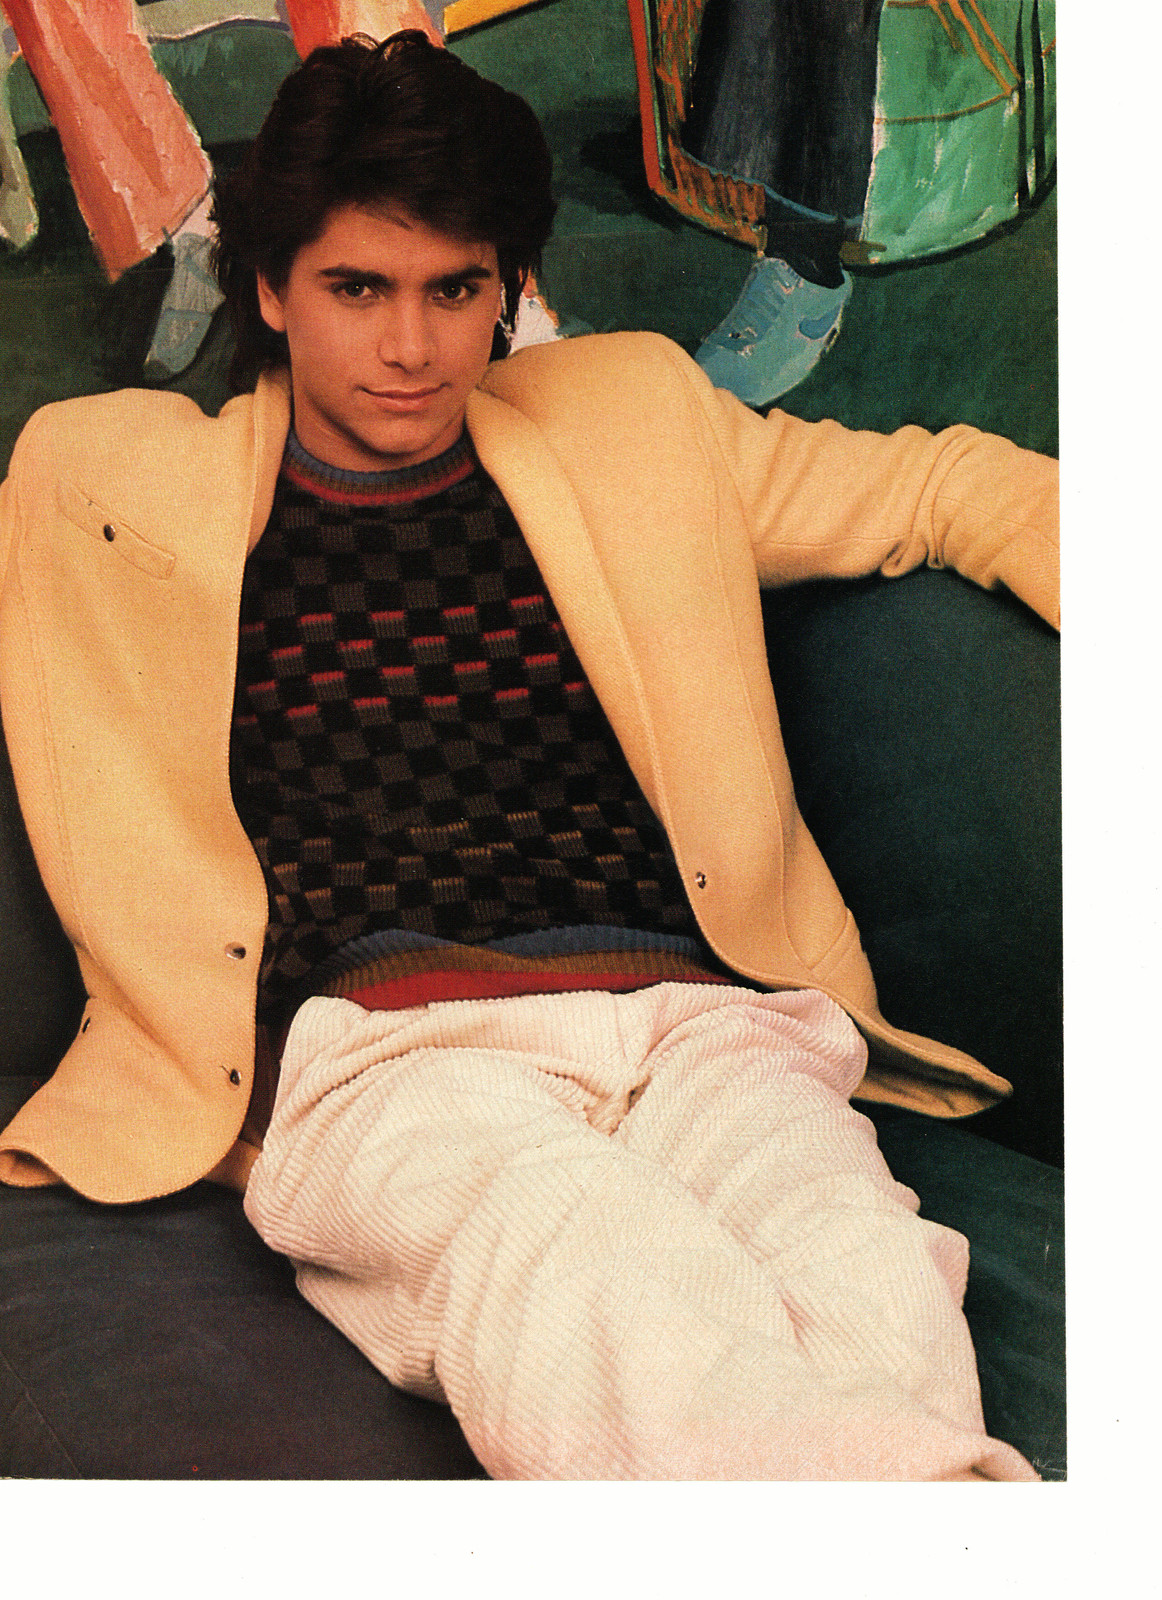 John Stamos Tom Cruise Teen Magazine Pinup Clipping Full House Netflix Bop Clippings